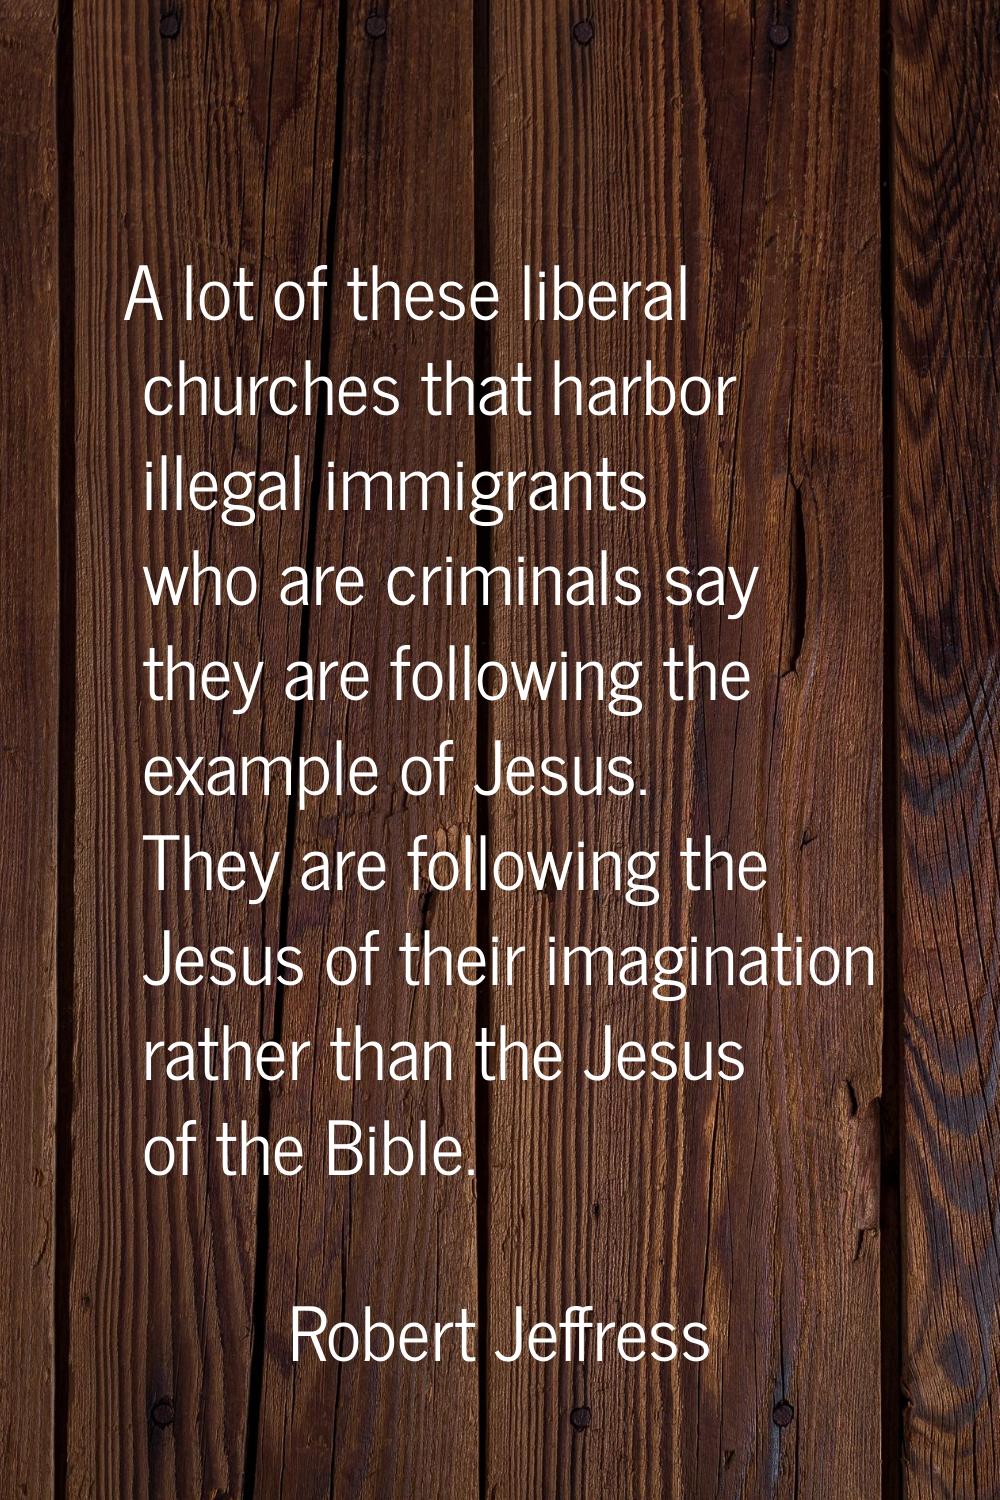 A lot of these liberal churches that harbor illegal immigrants who are criminals say they are follo